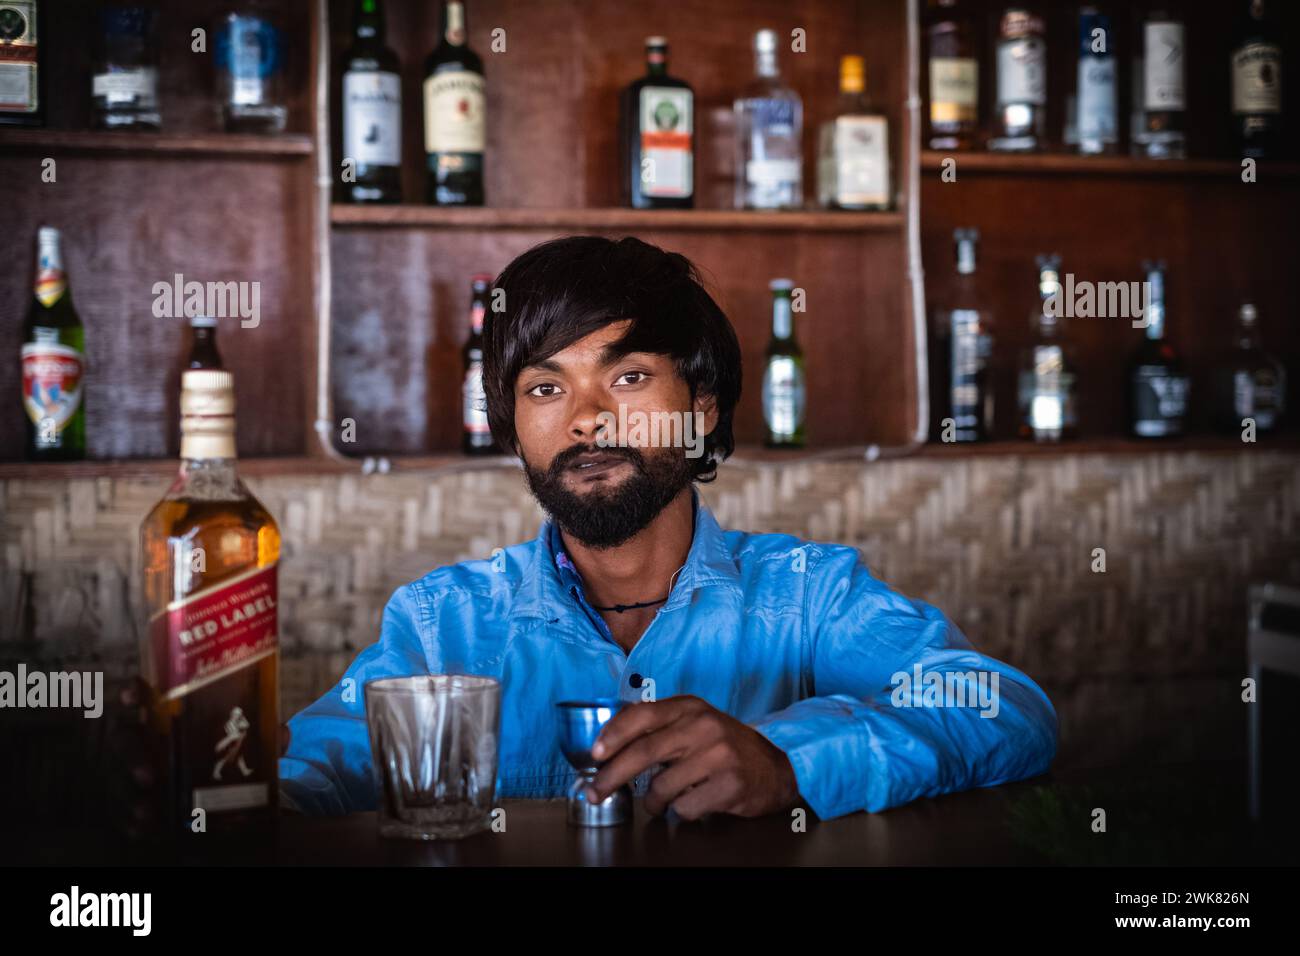 Alcohol drinks, people and profession concept - Indian barman in Goa India. Bar man getting ready to pour a drink in the glass. Stock Photo